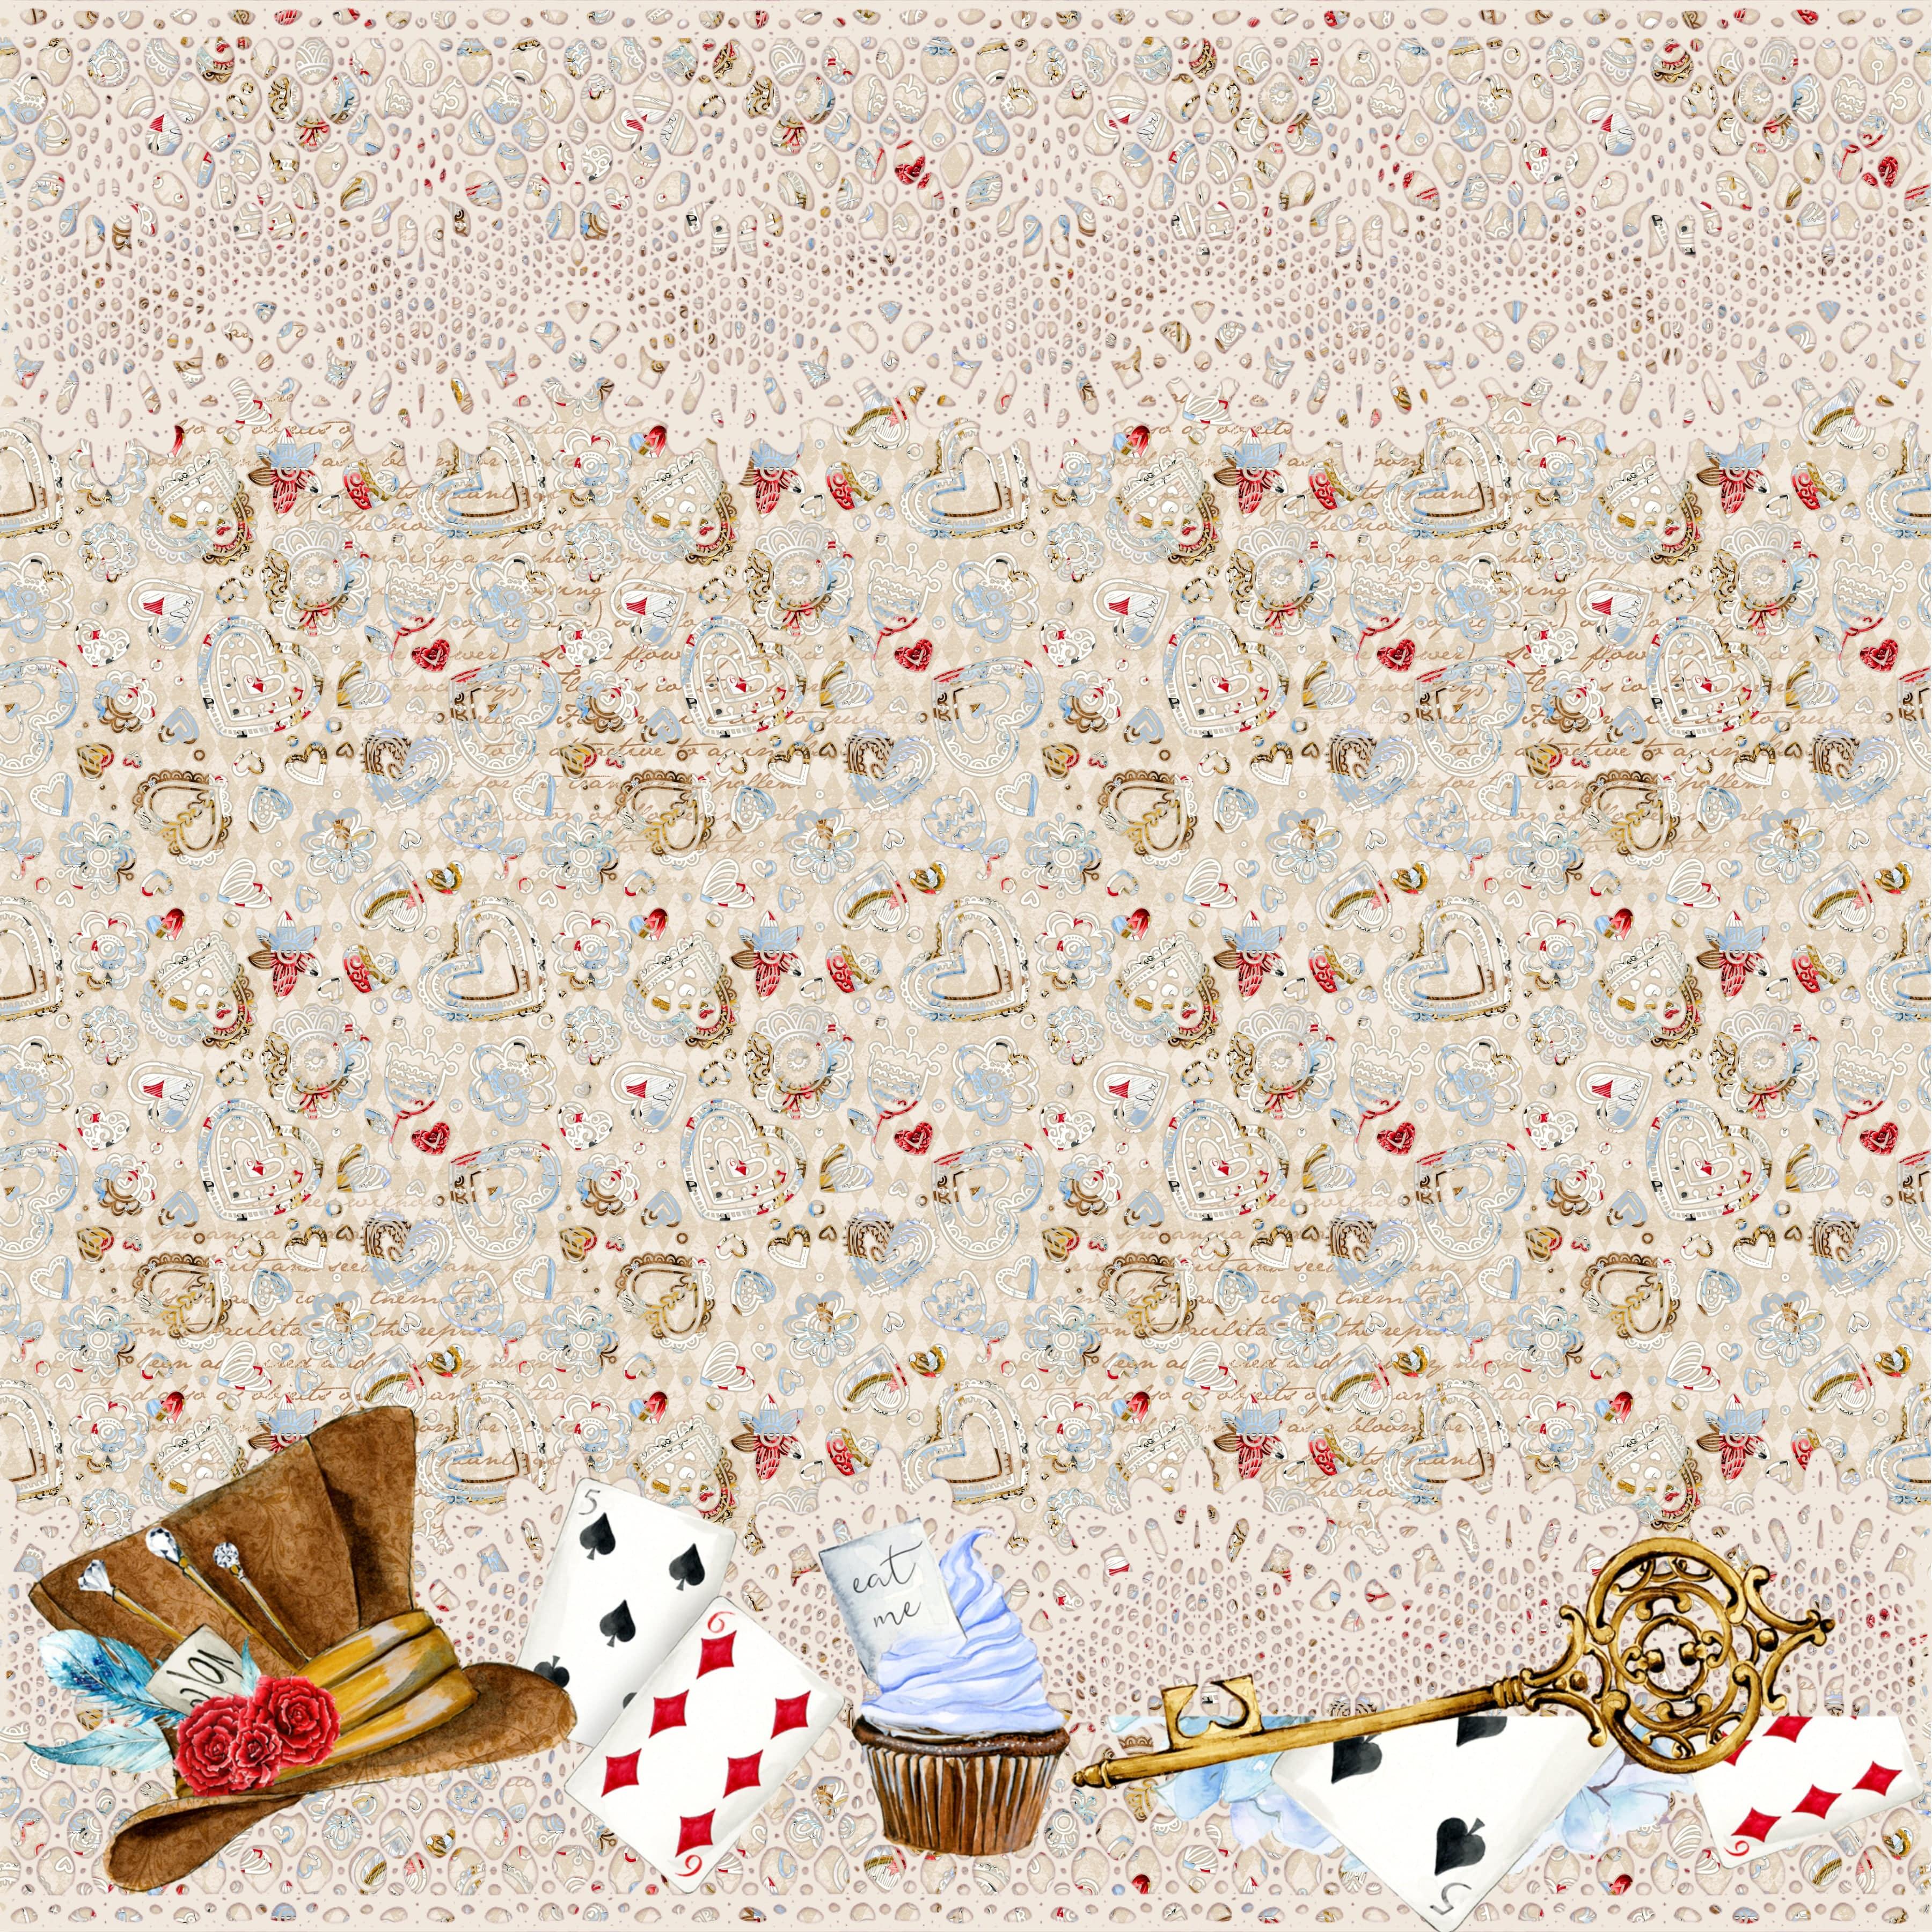 Frou Frou's Alice Collection Wonderland 12 x 12 Double-Sided Scrapbook Paper by SSC Designs - Scrapbook Supply Companies